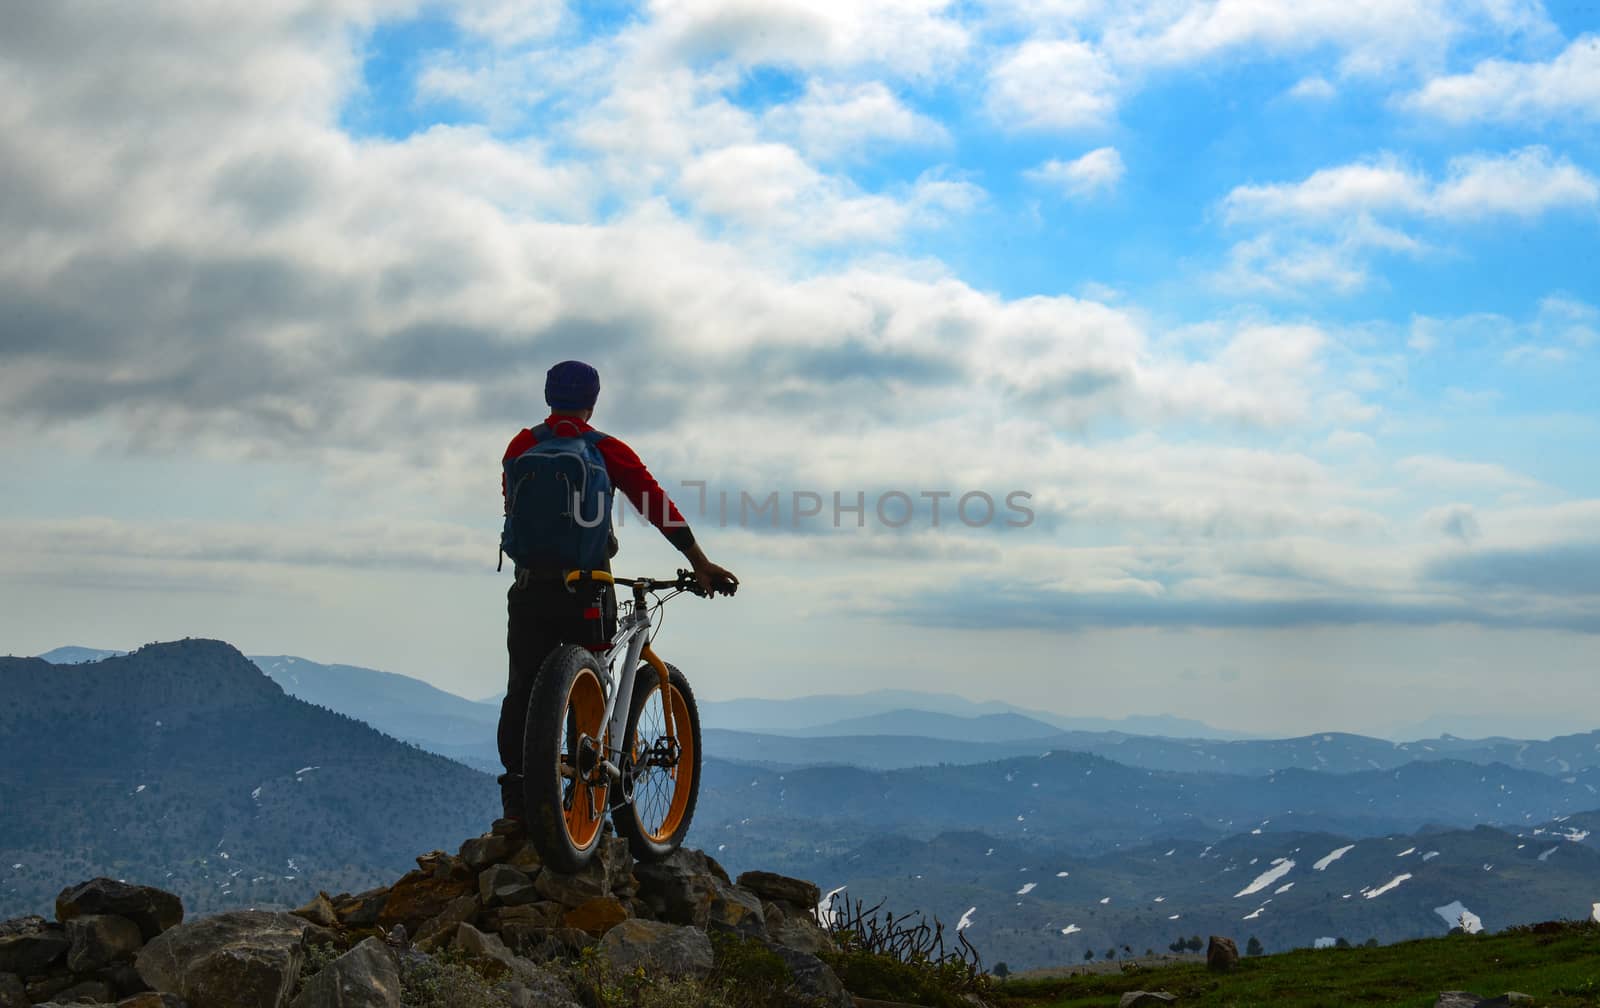 Ride and adventure in different mountains on a bicycle by crazymedia007